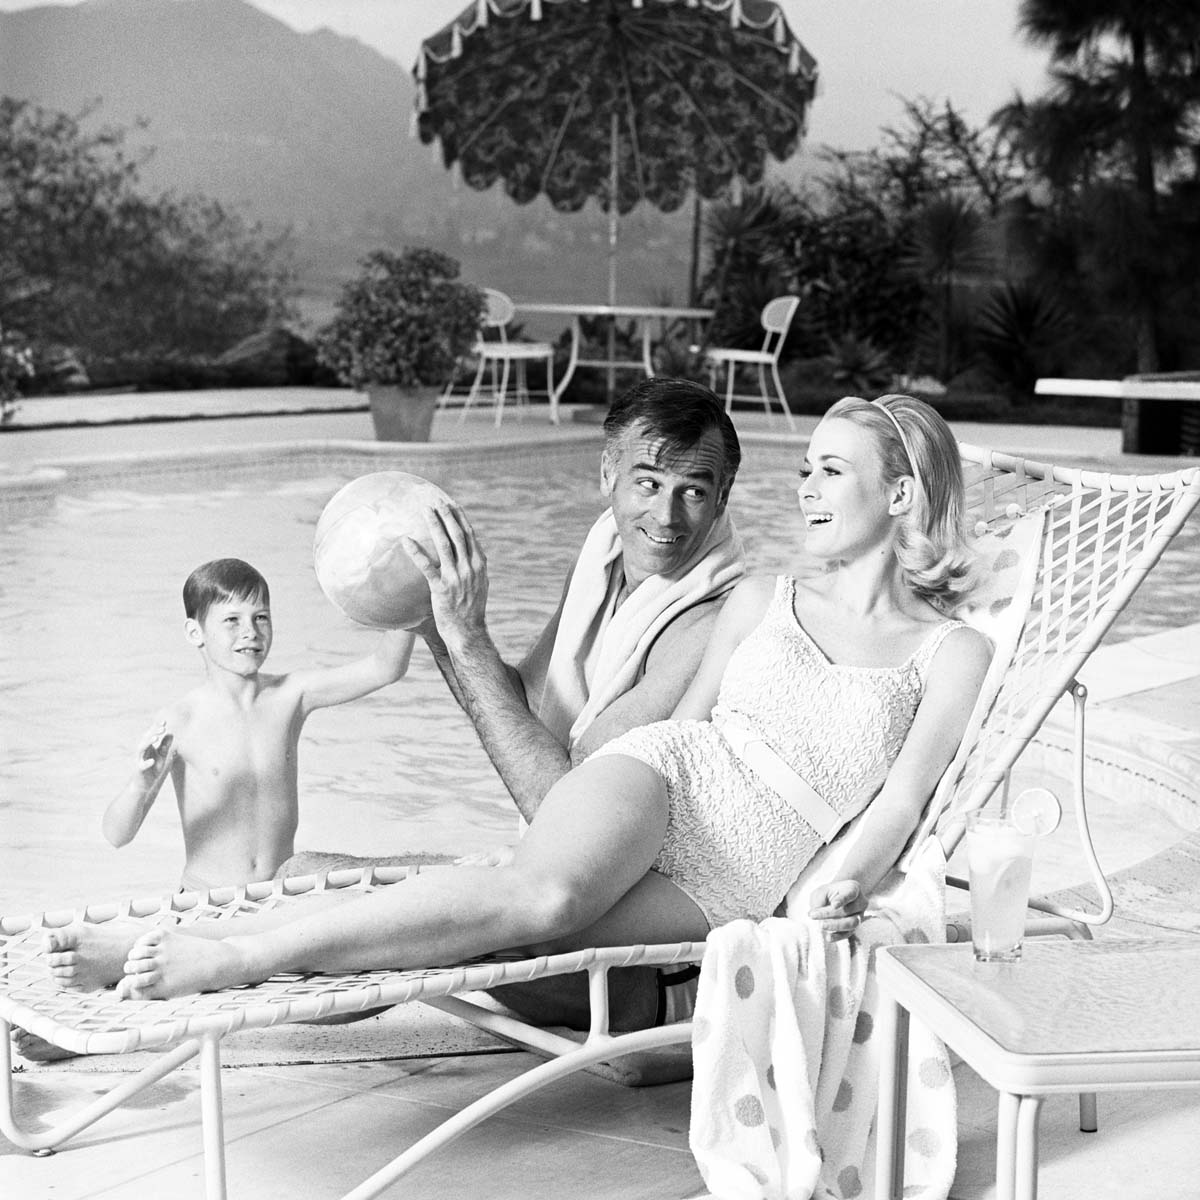 1960s family poolside article essentials good ad copy